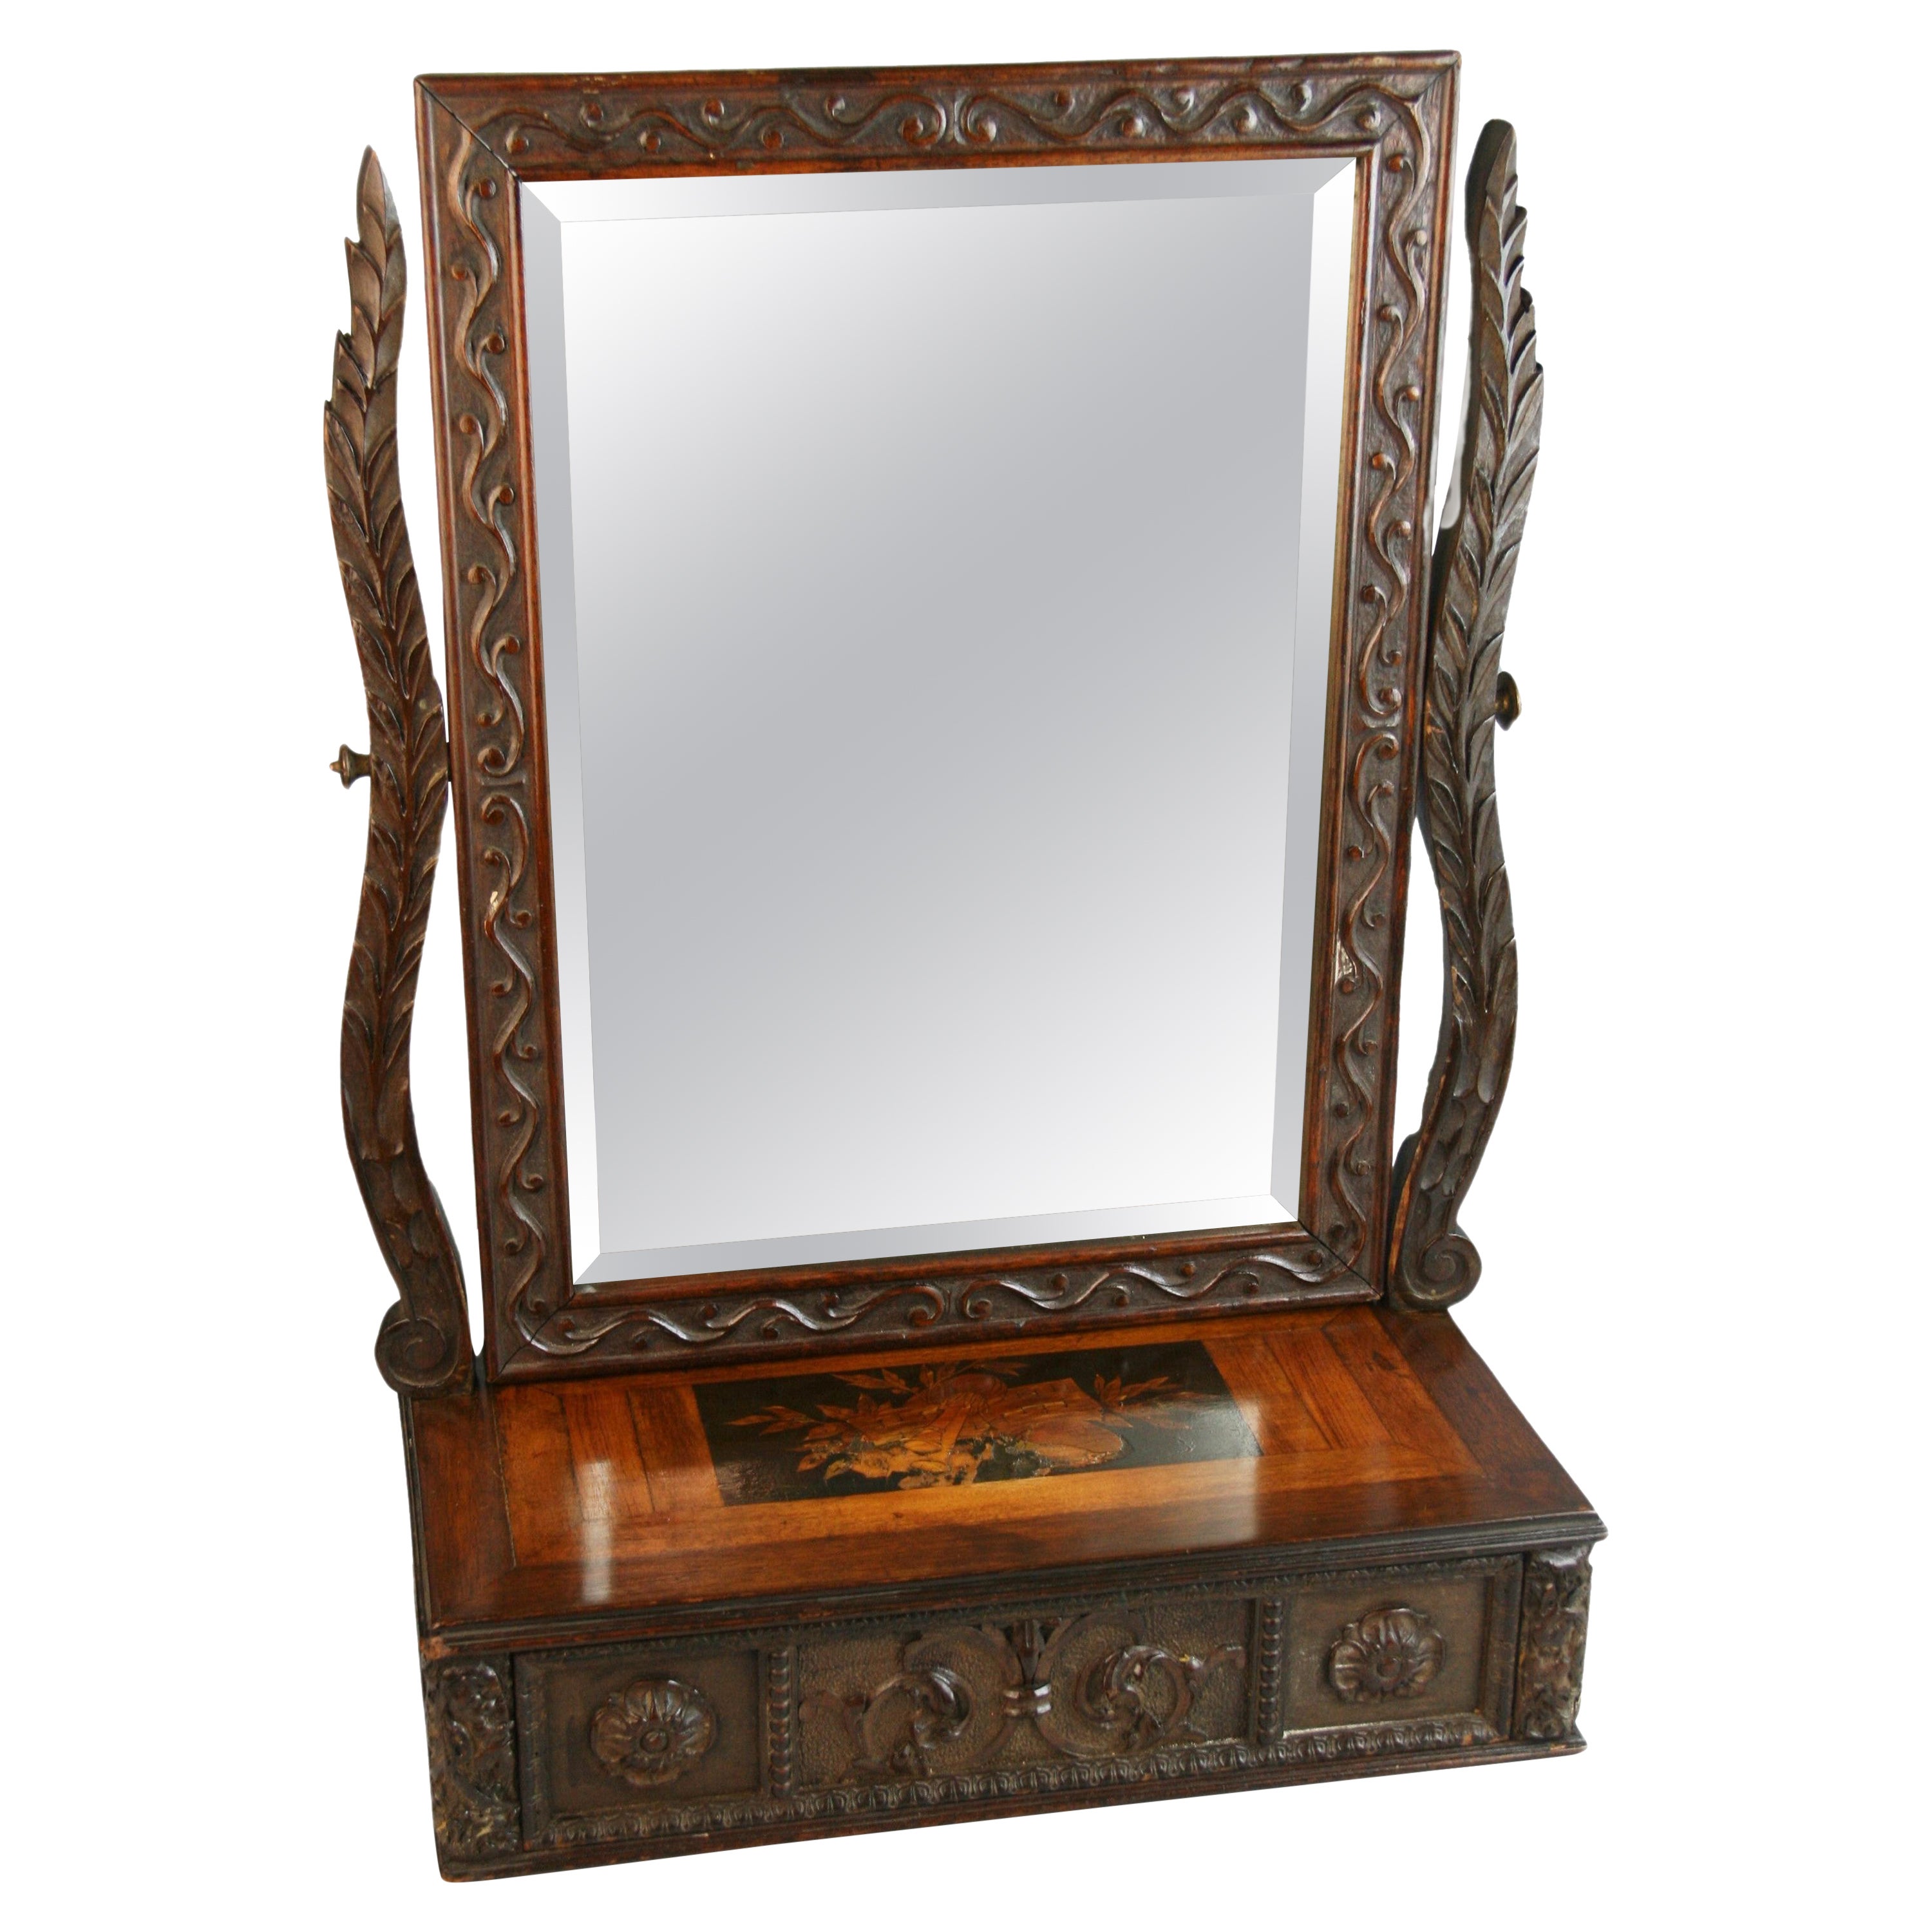 Antique Carved Dressing Table Swing Mirror 1870's